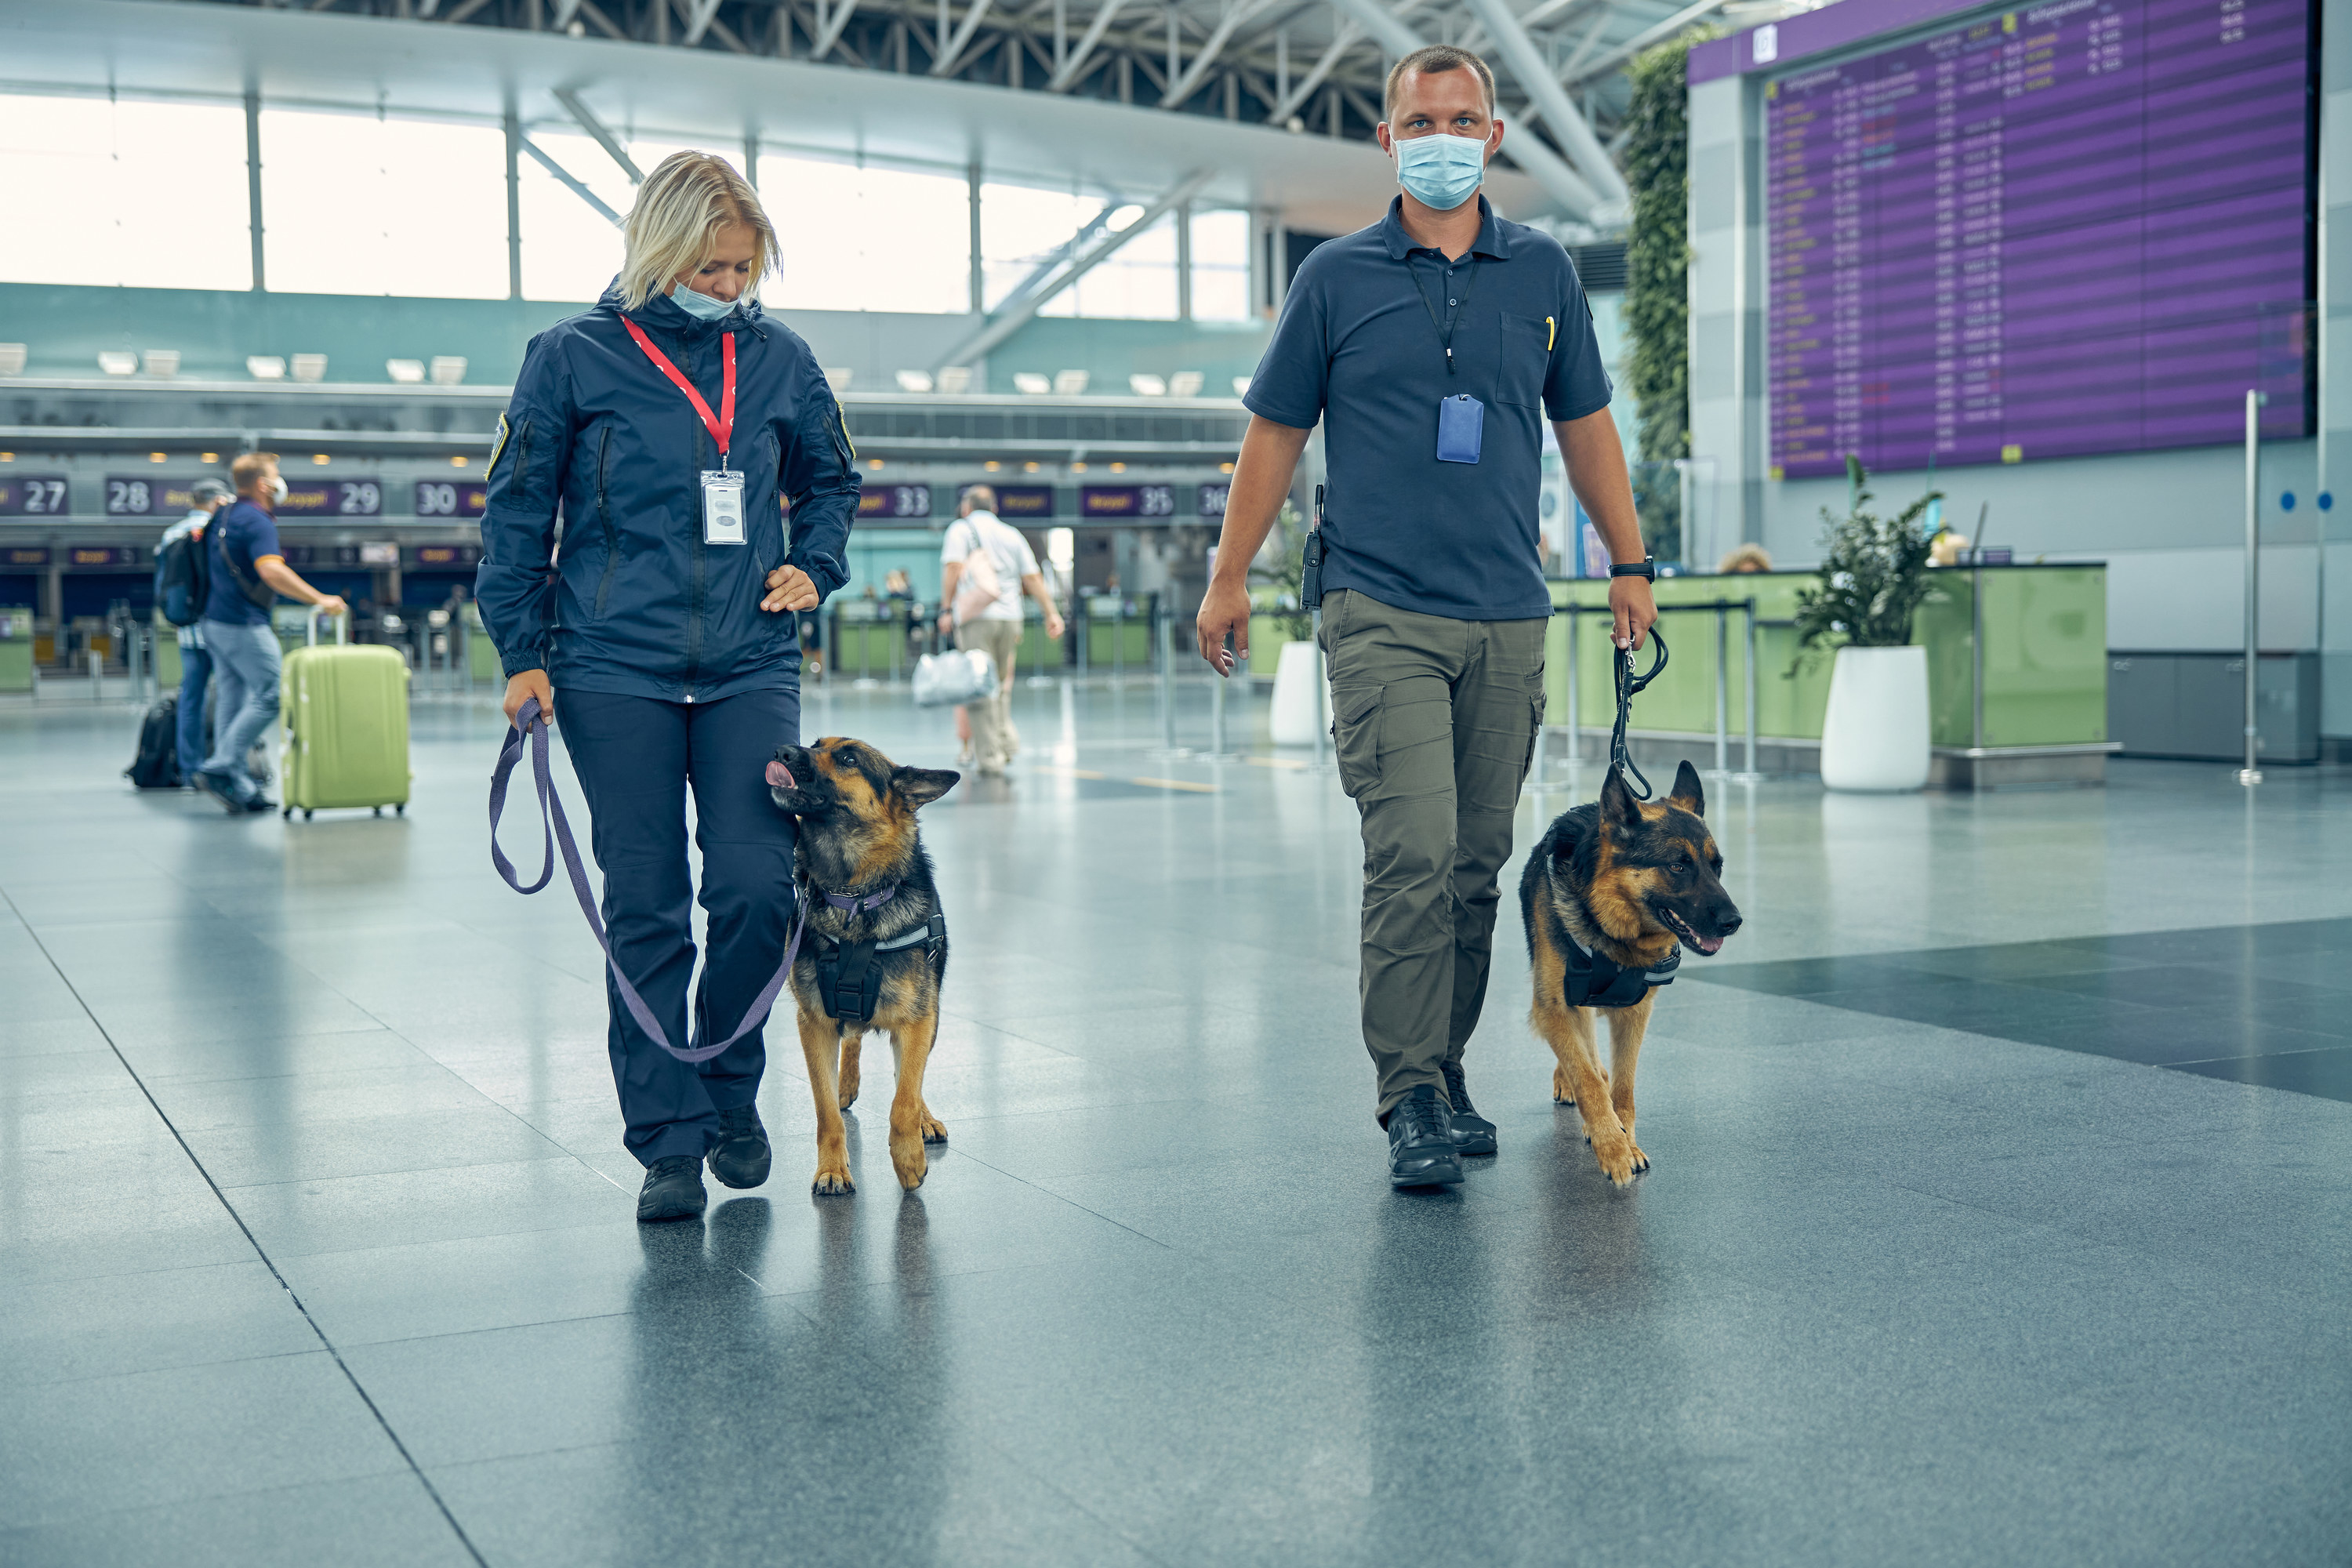 TSA agents with dogs at the airport